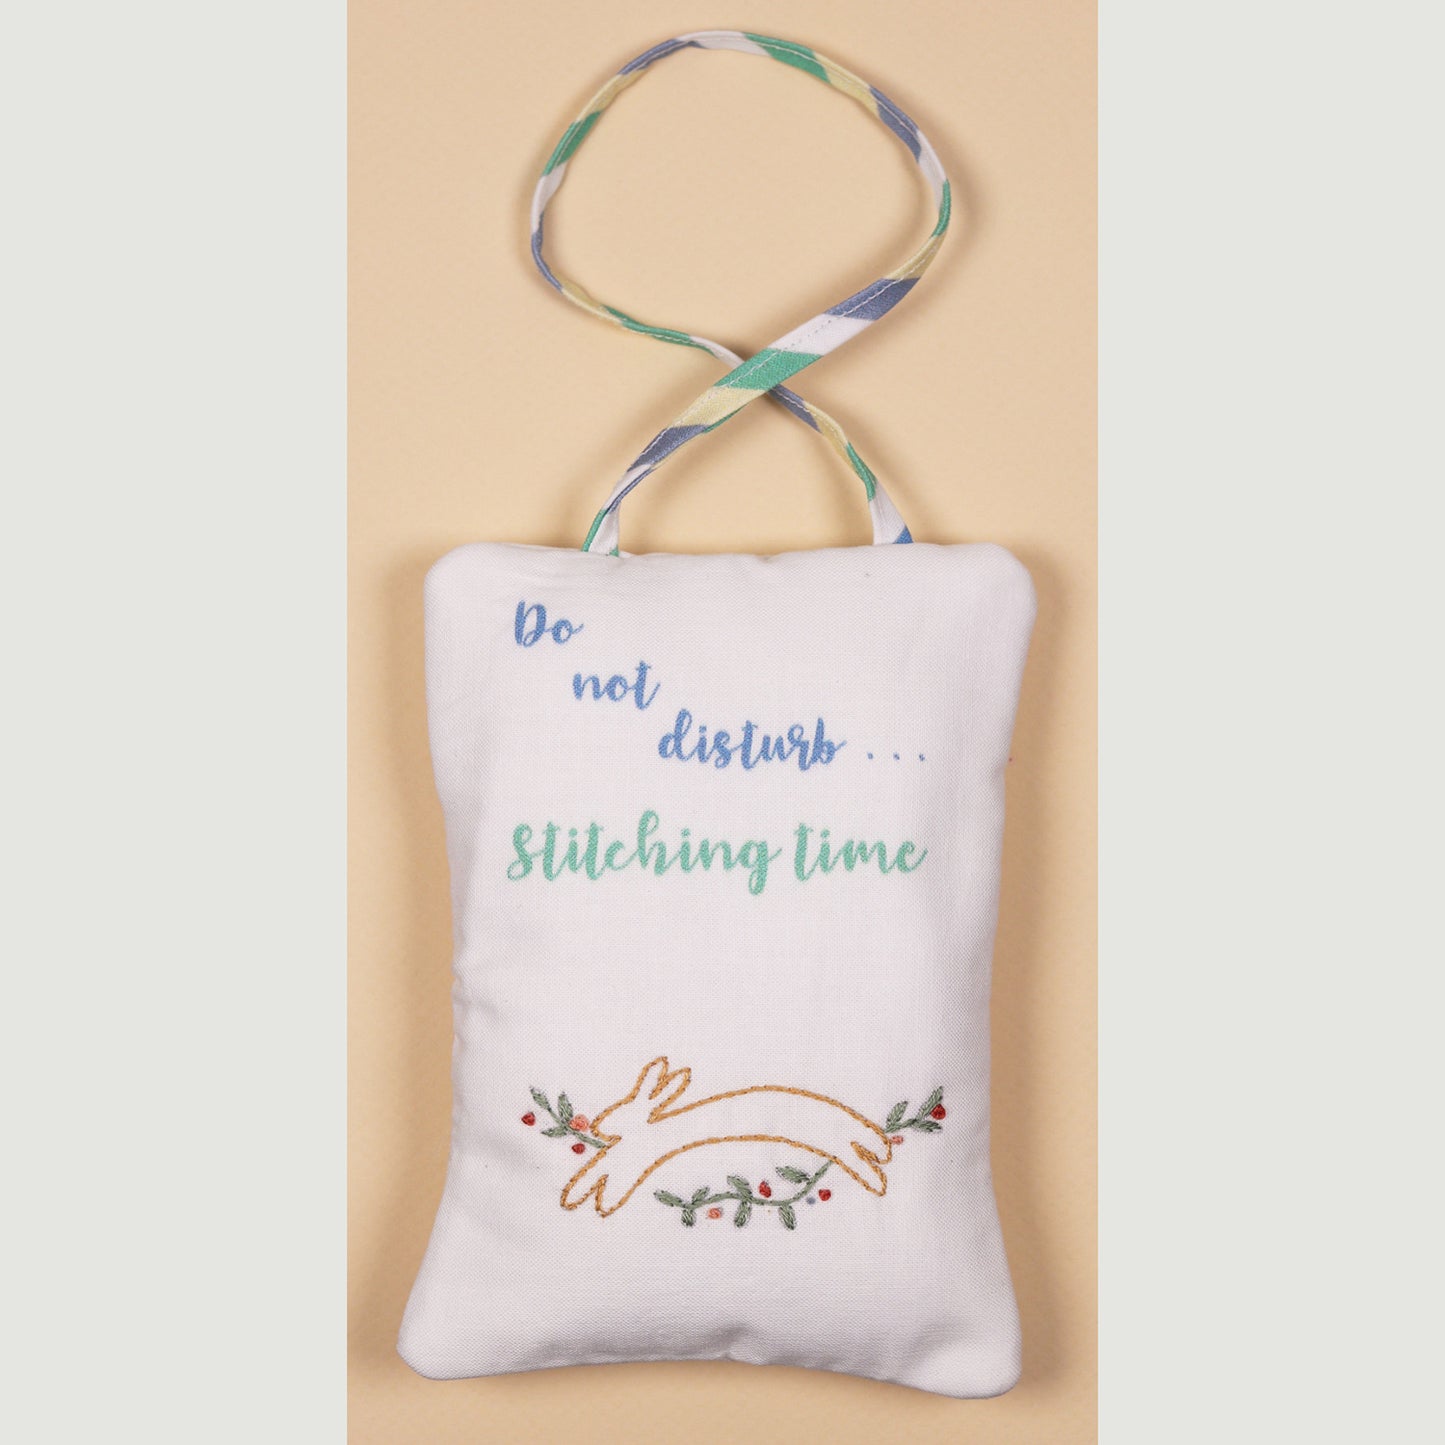 Stitching Time Doorknob Pillow Embroidery Kit Primary Image